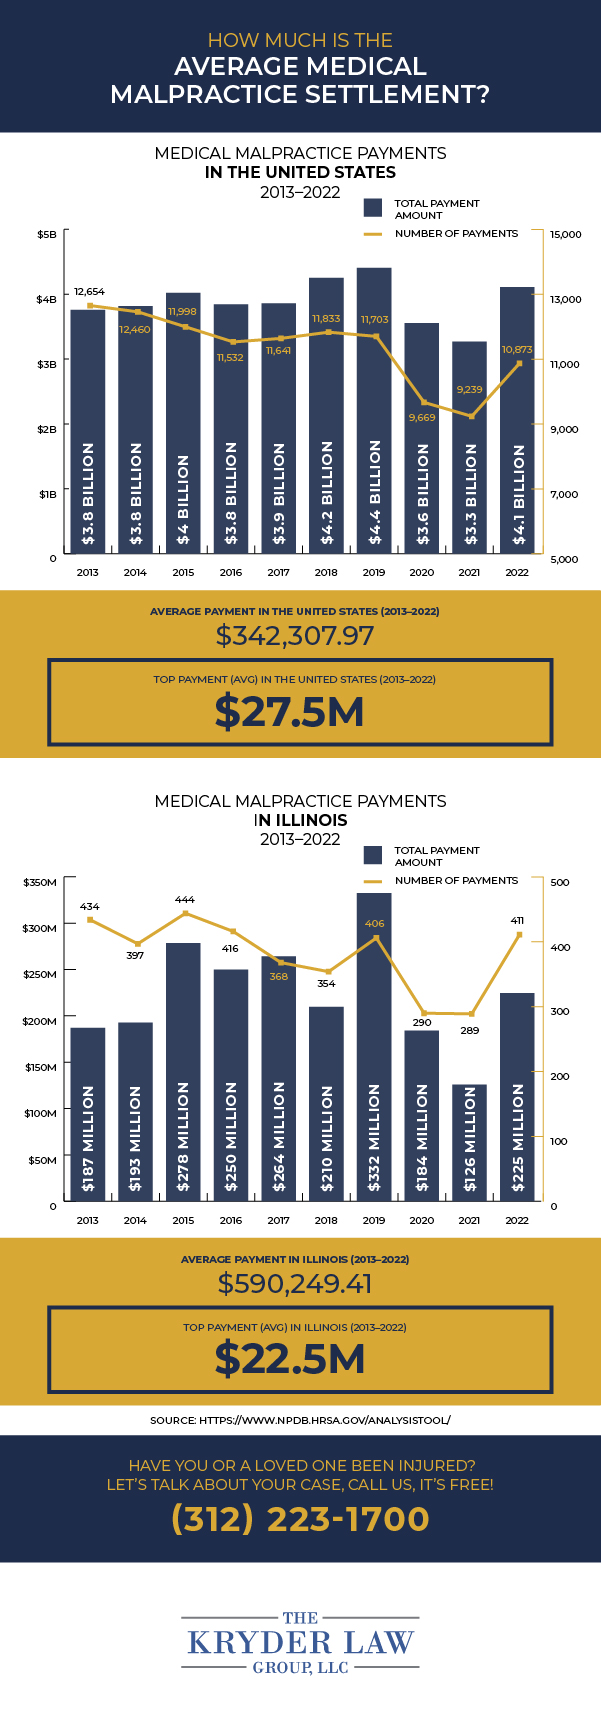 How Much is the Average Medical Malpractice Settlement?